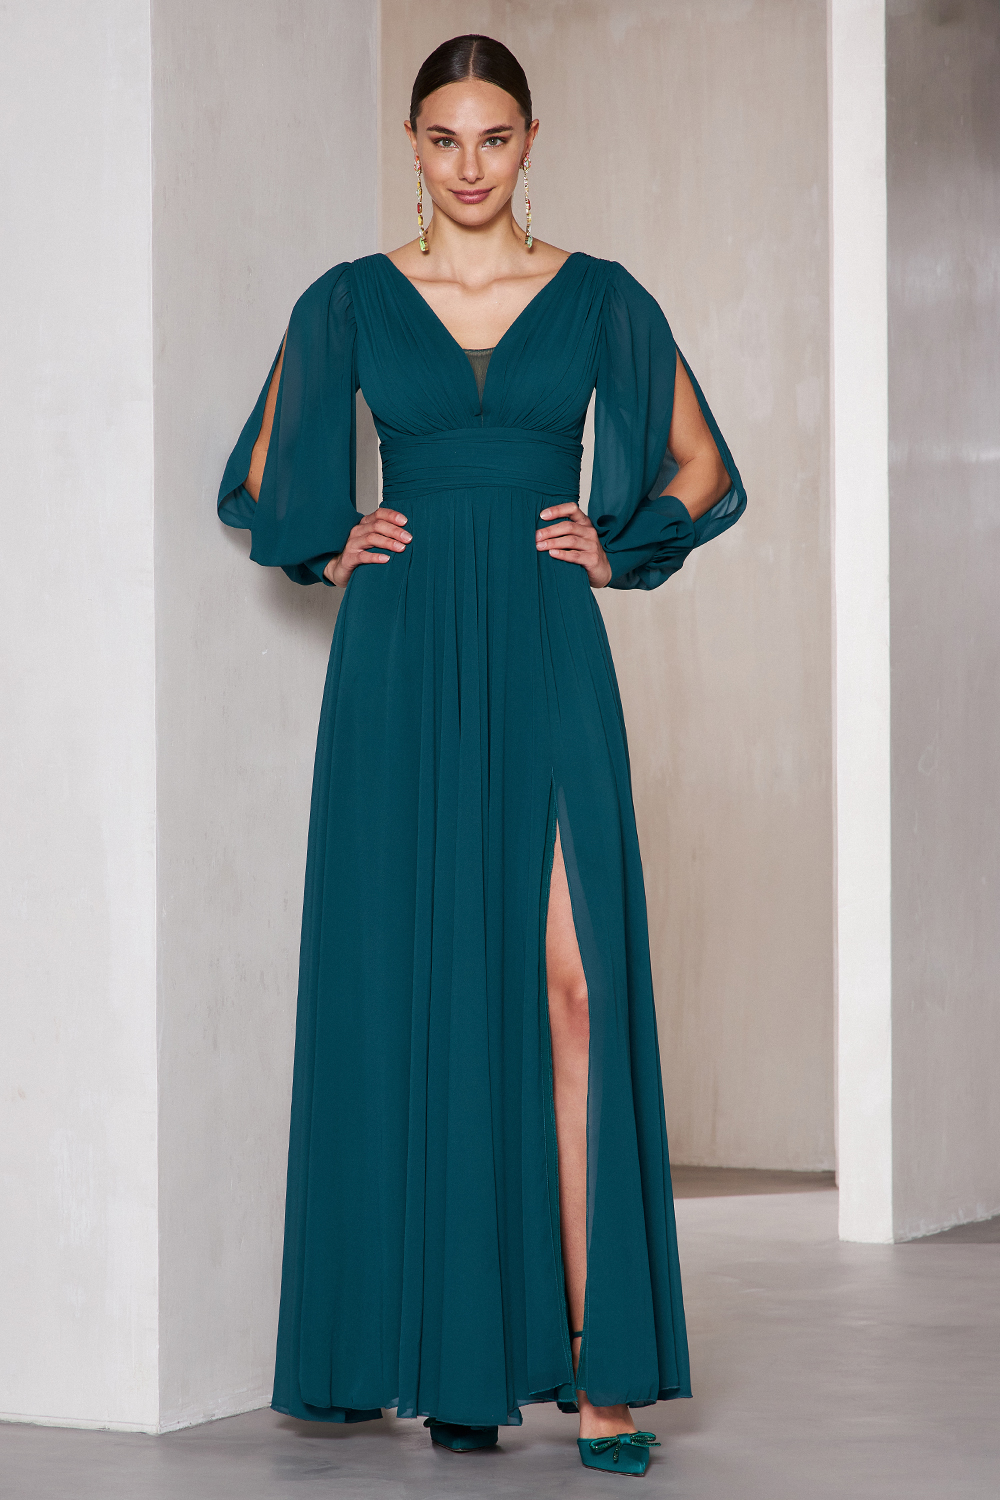 Classic Dresses / Long cocktail dress with chiffon fabric, long sleeves and opening